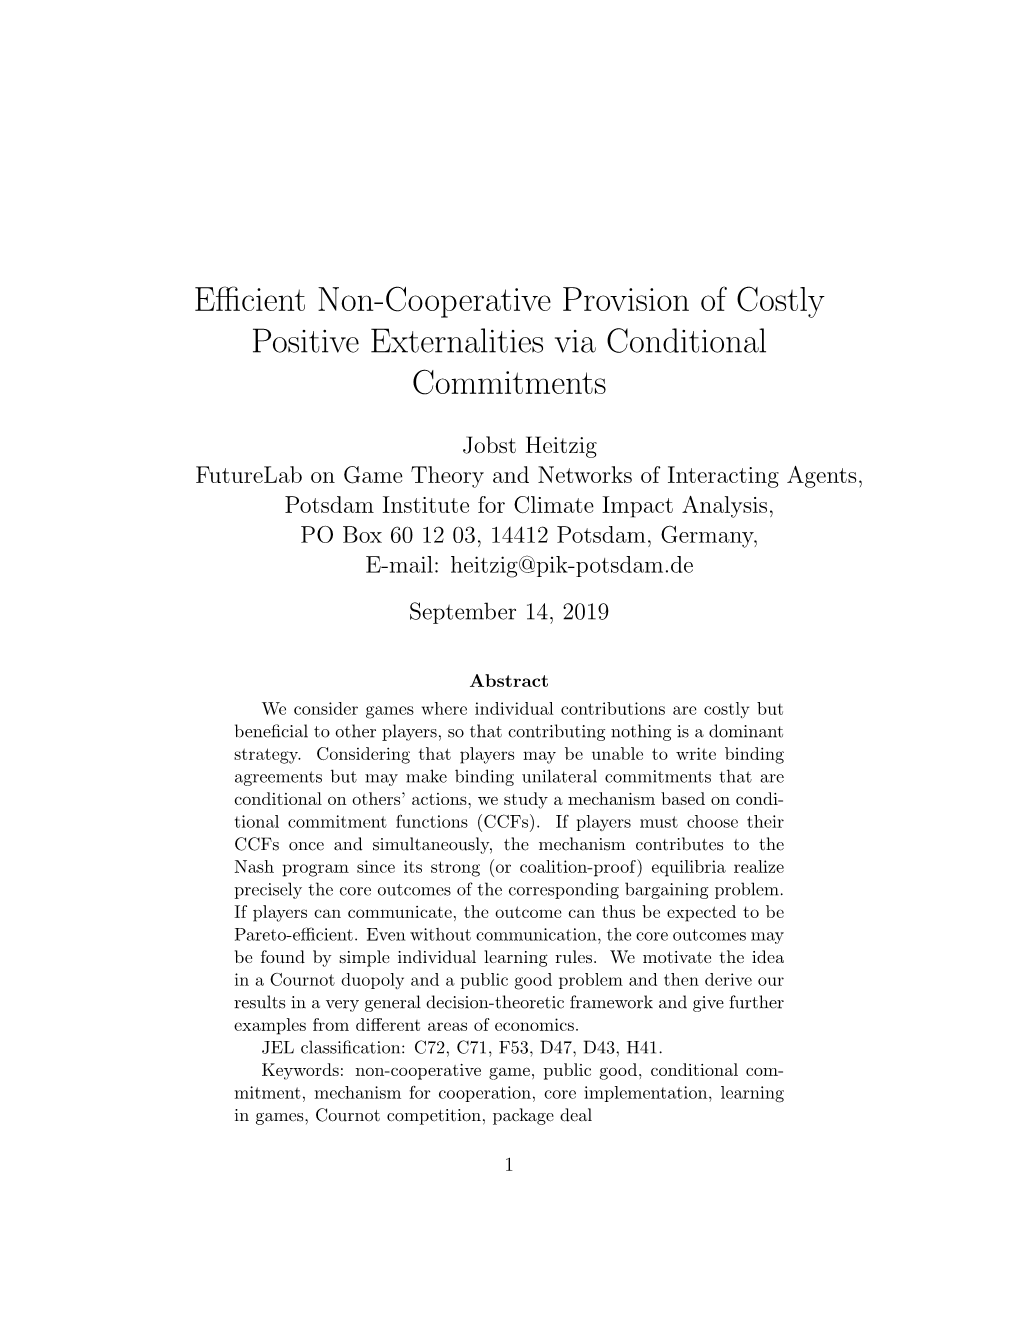 Efficient Non-Cooperative Provision of Costly Positive Externalities Via